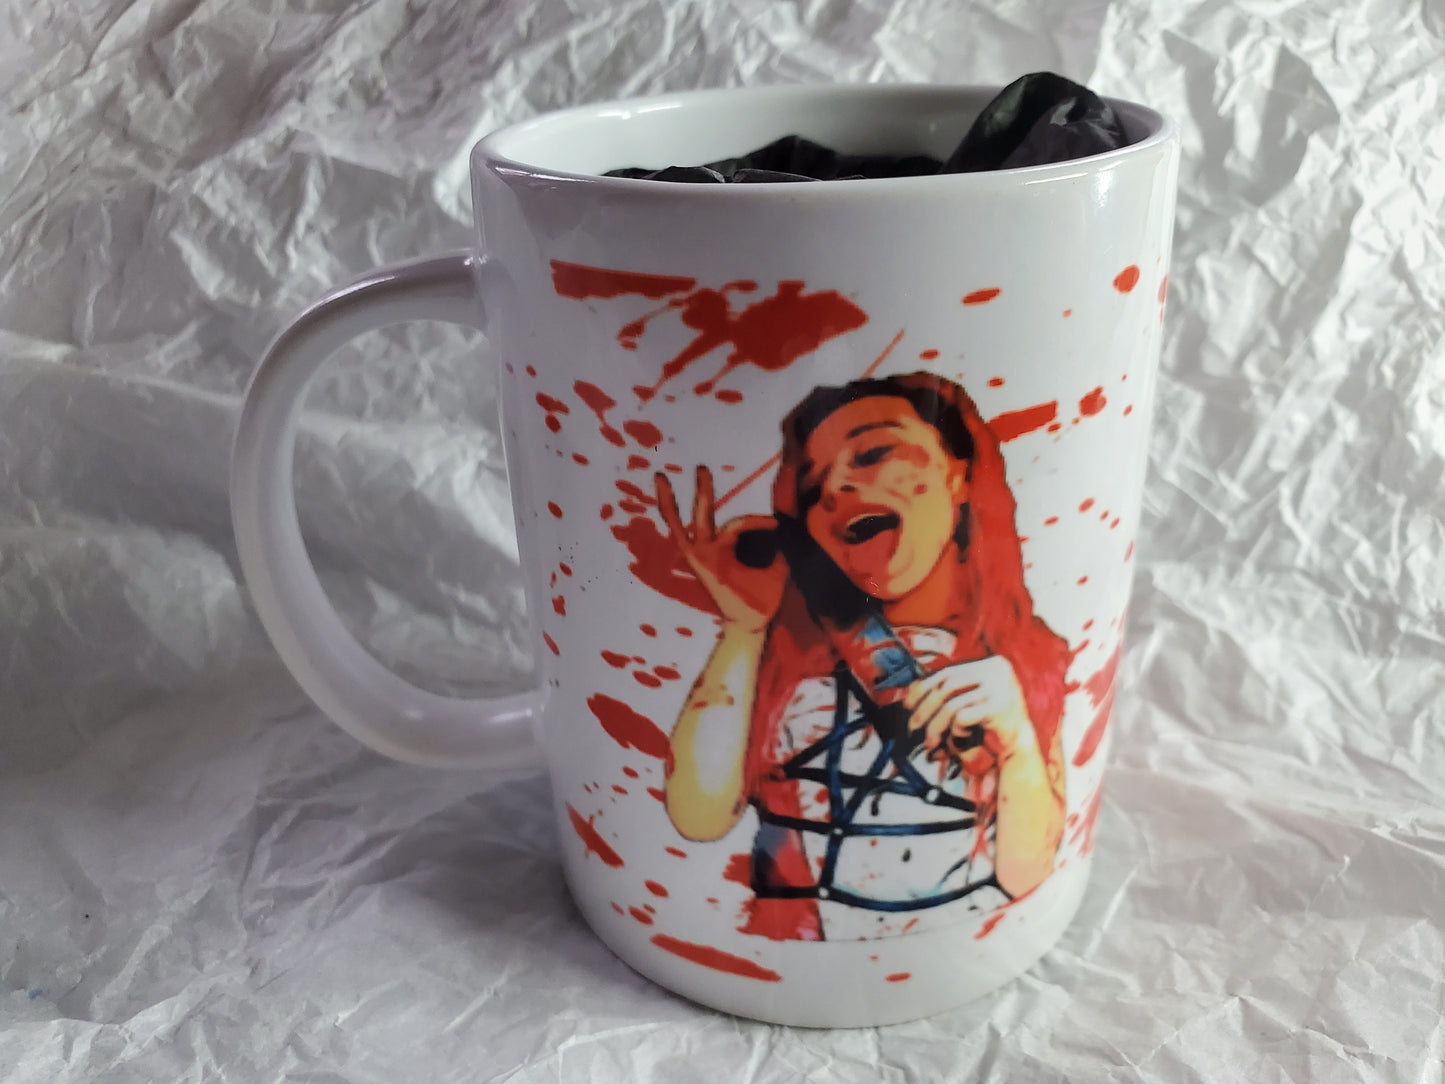 The Bloody Bakery Collectors Mug